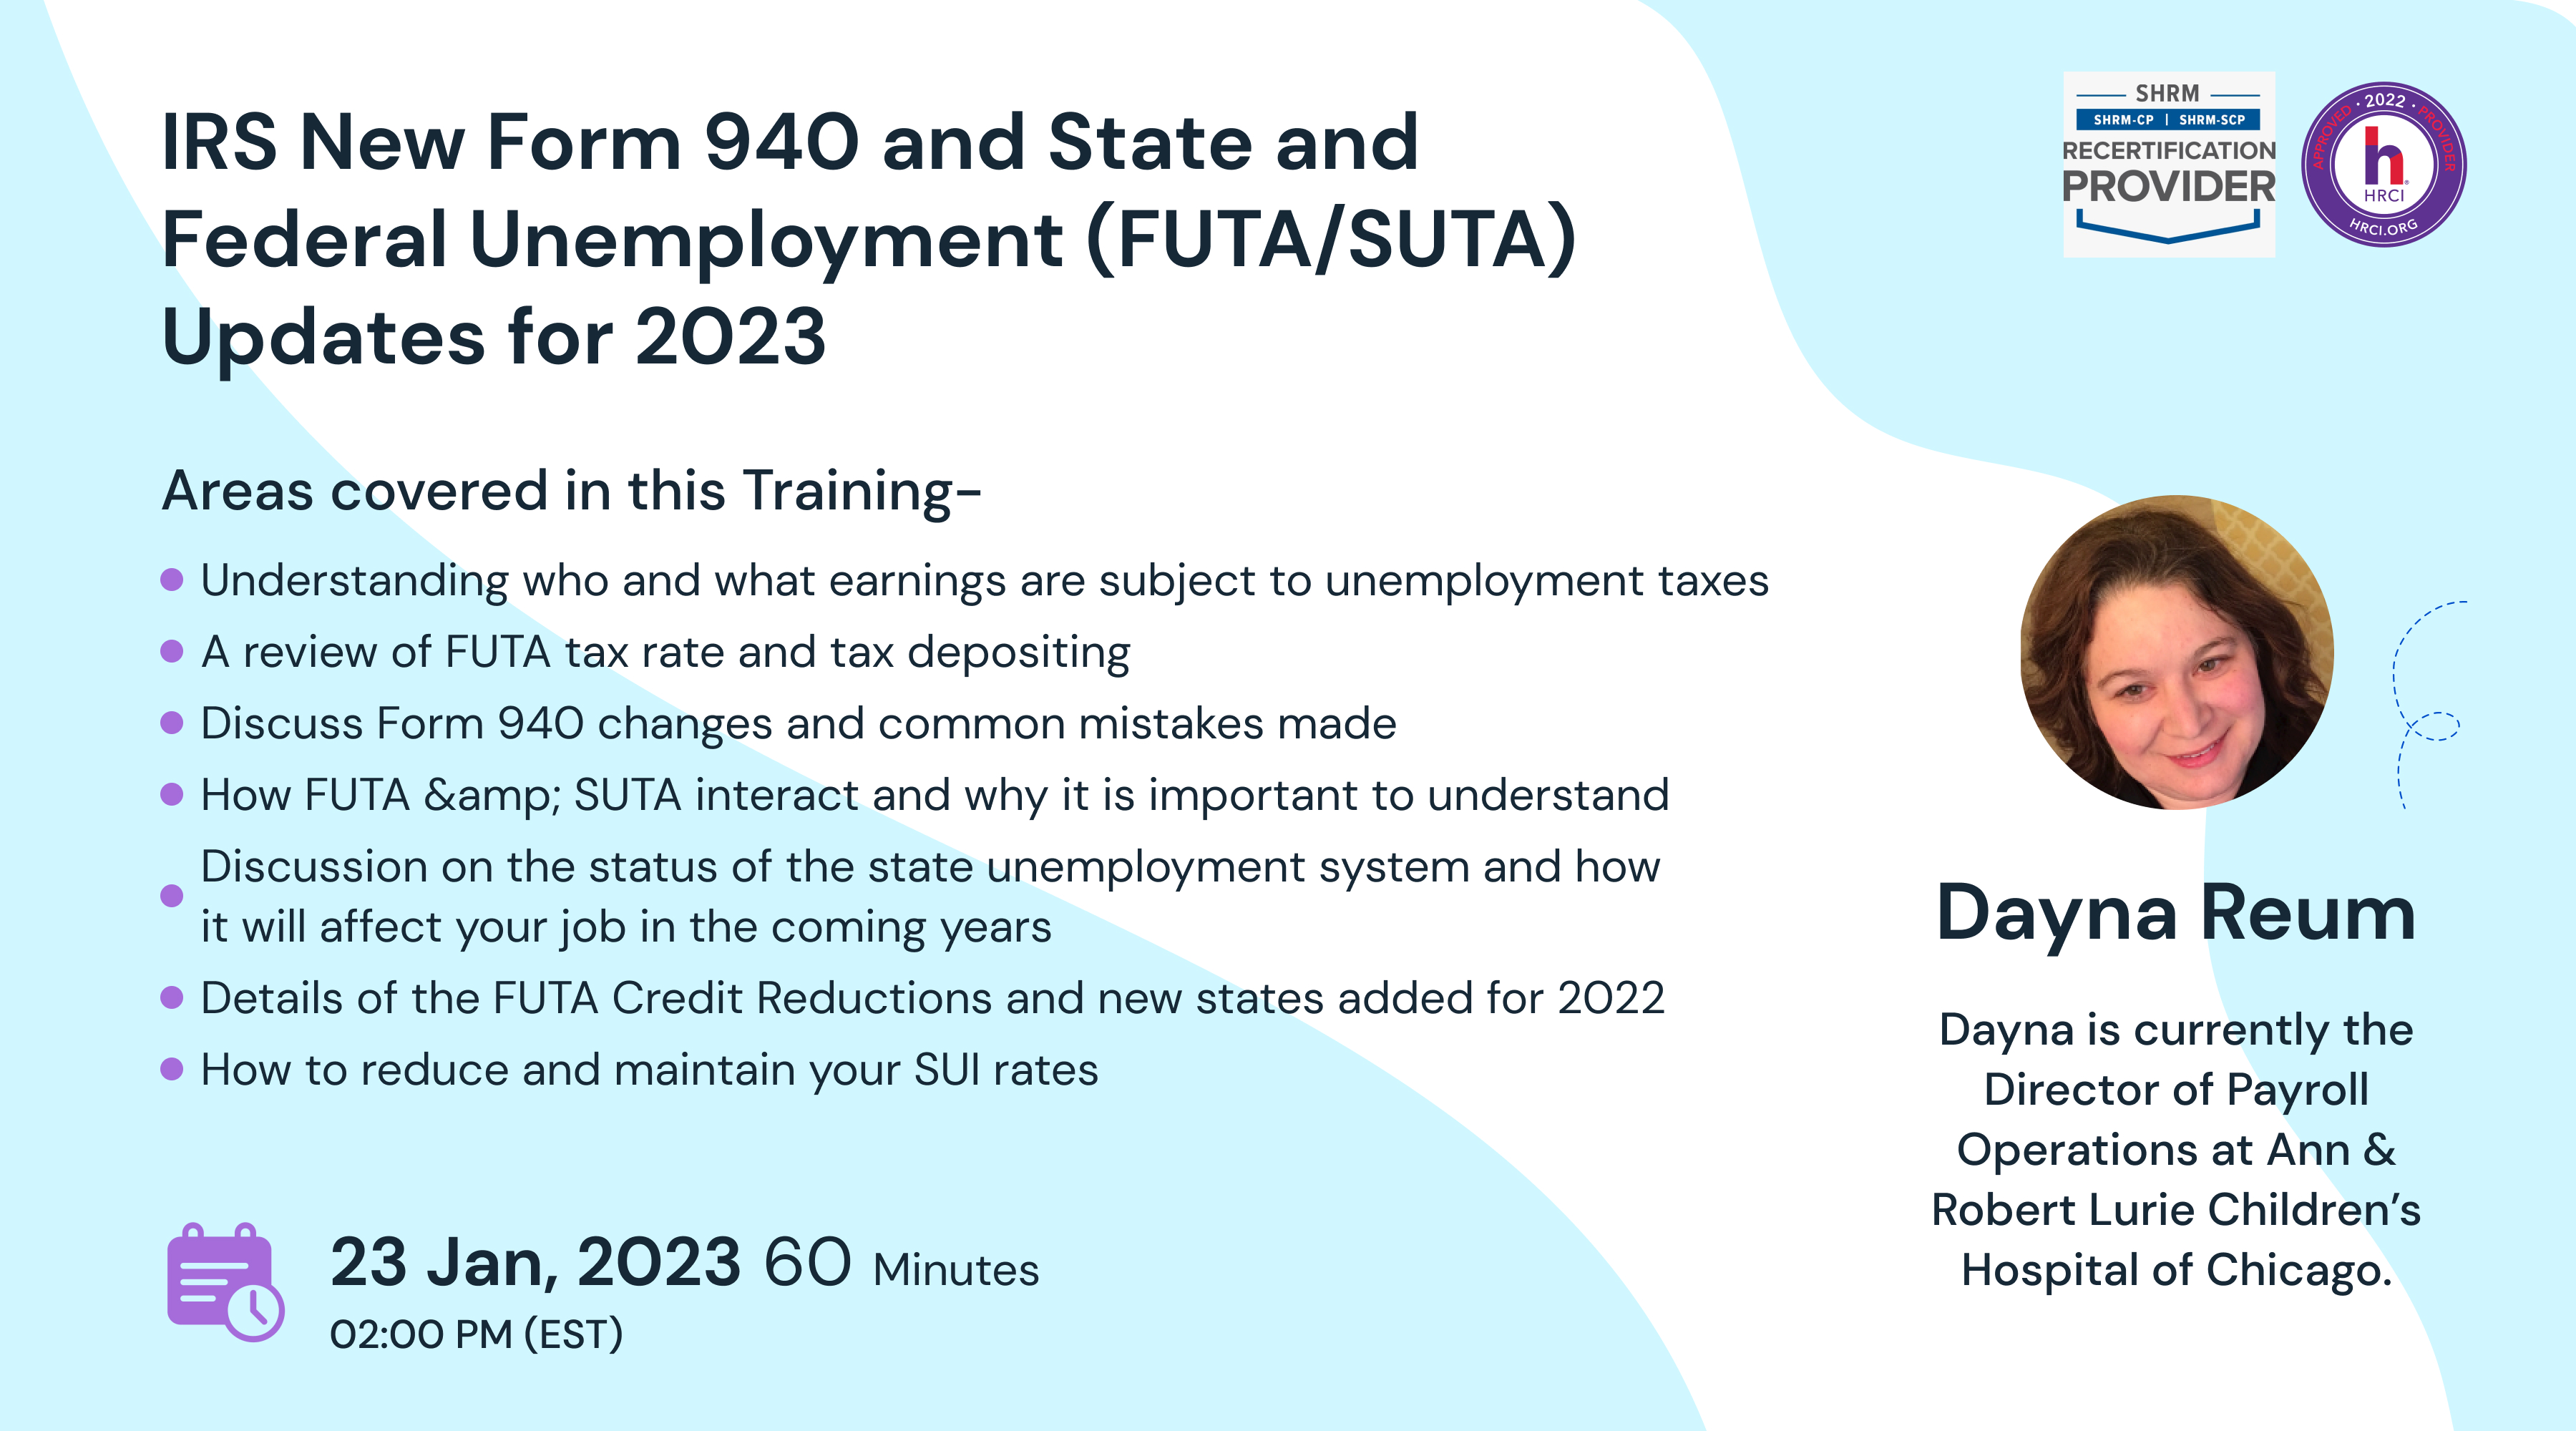 IRS New Form 940 and State and Federal Unemployment (FUTA/SUTA) Updates for 2023